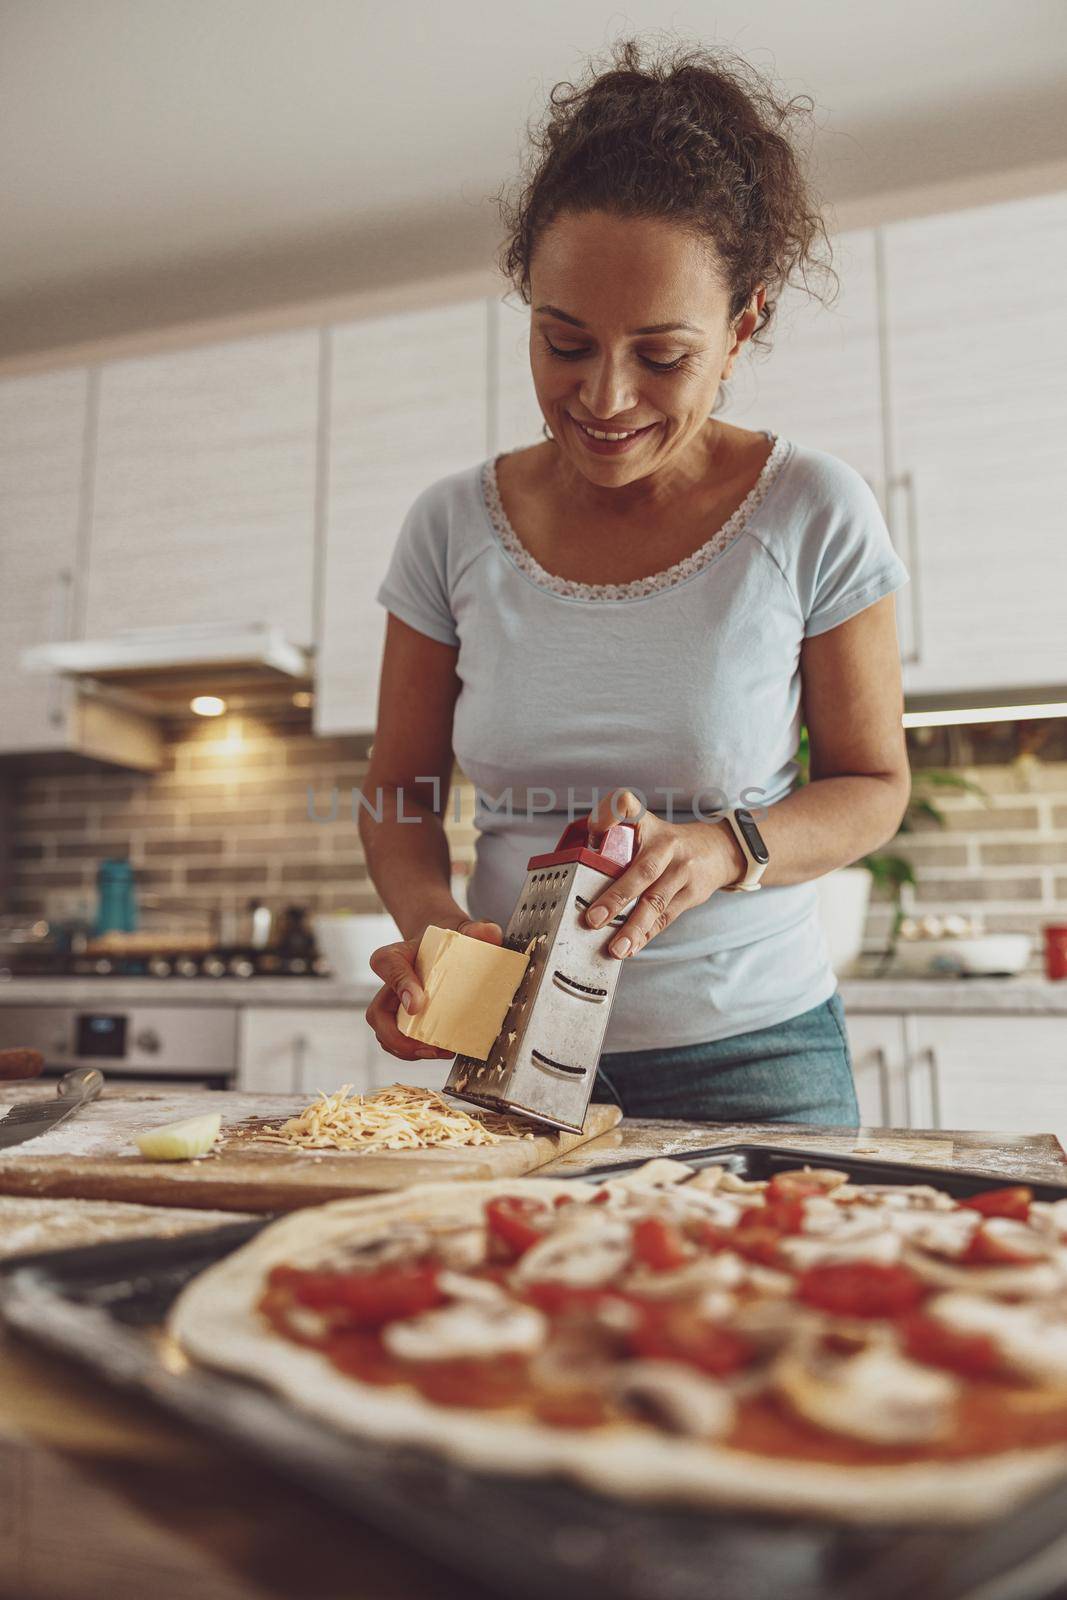 Cooking pizza with mushrooms and cheese by a young woman at home in the kitchen